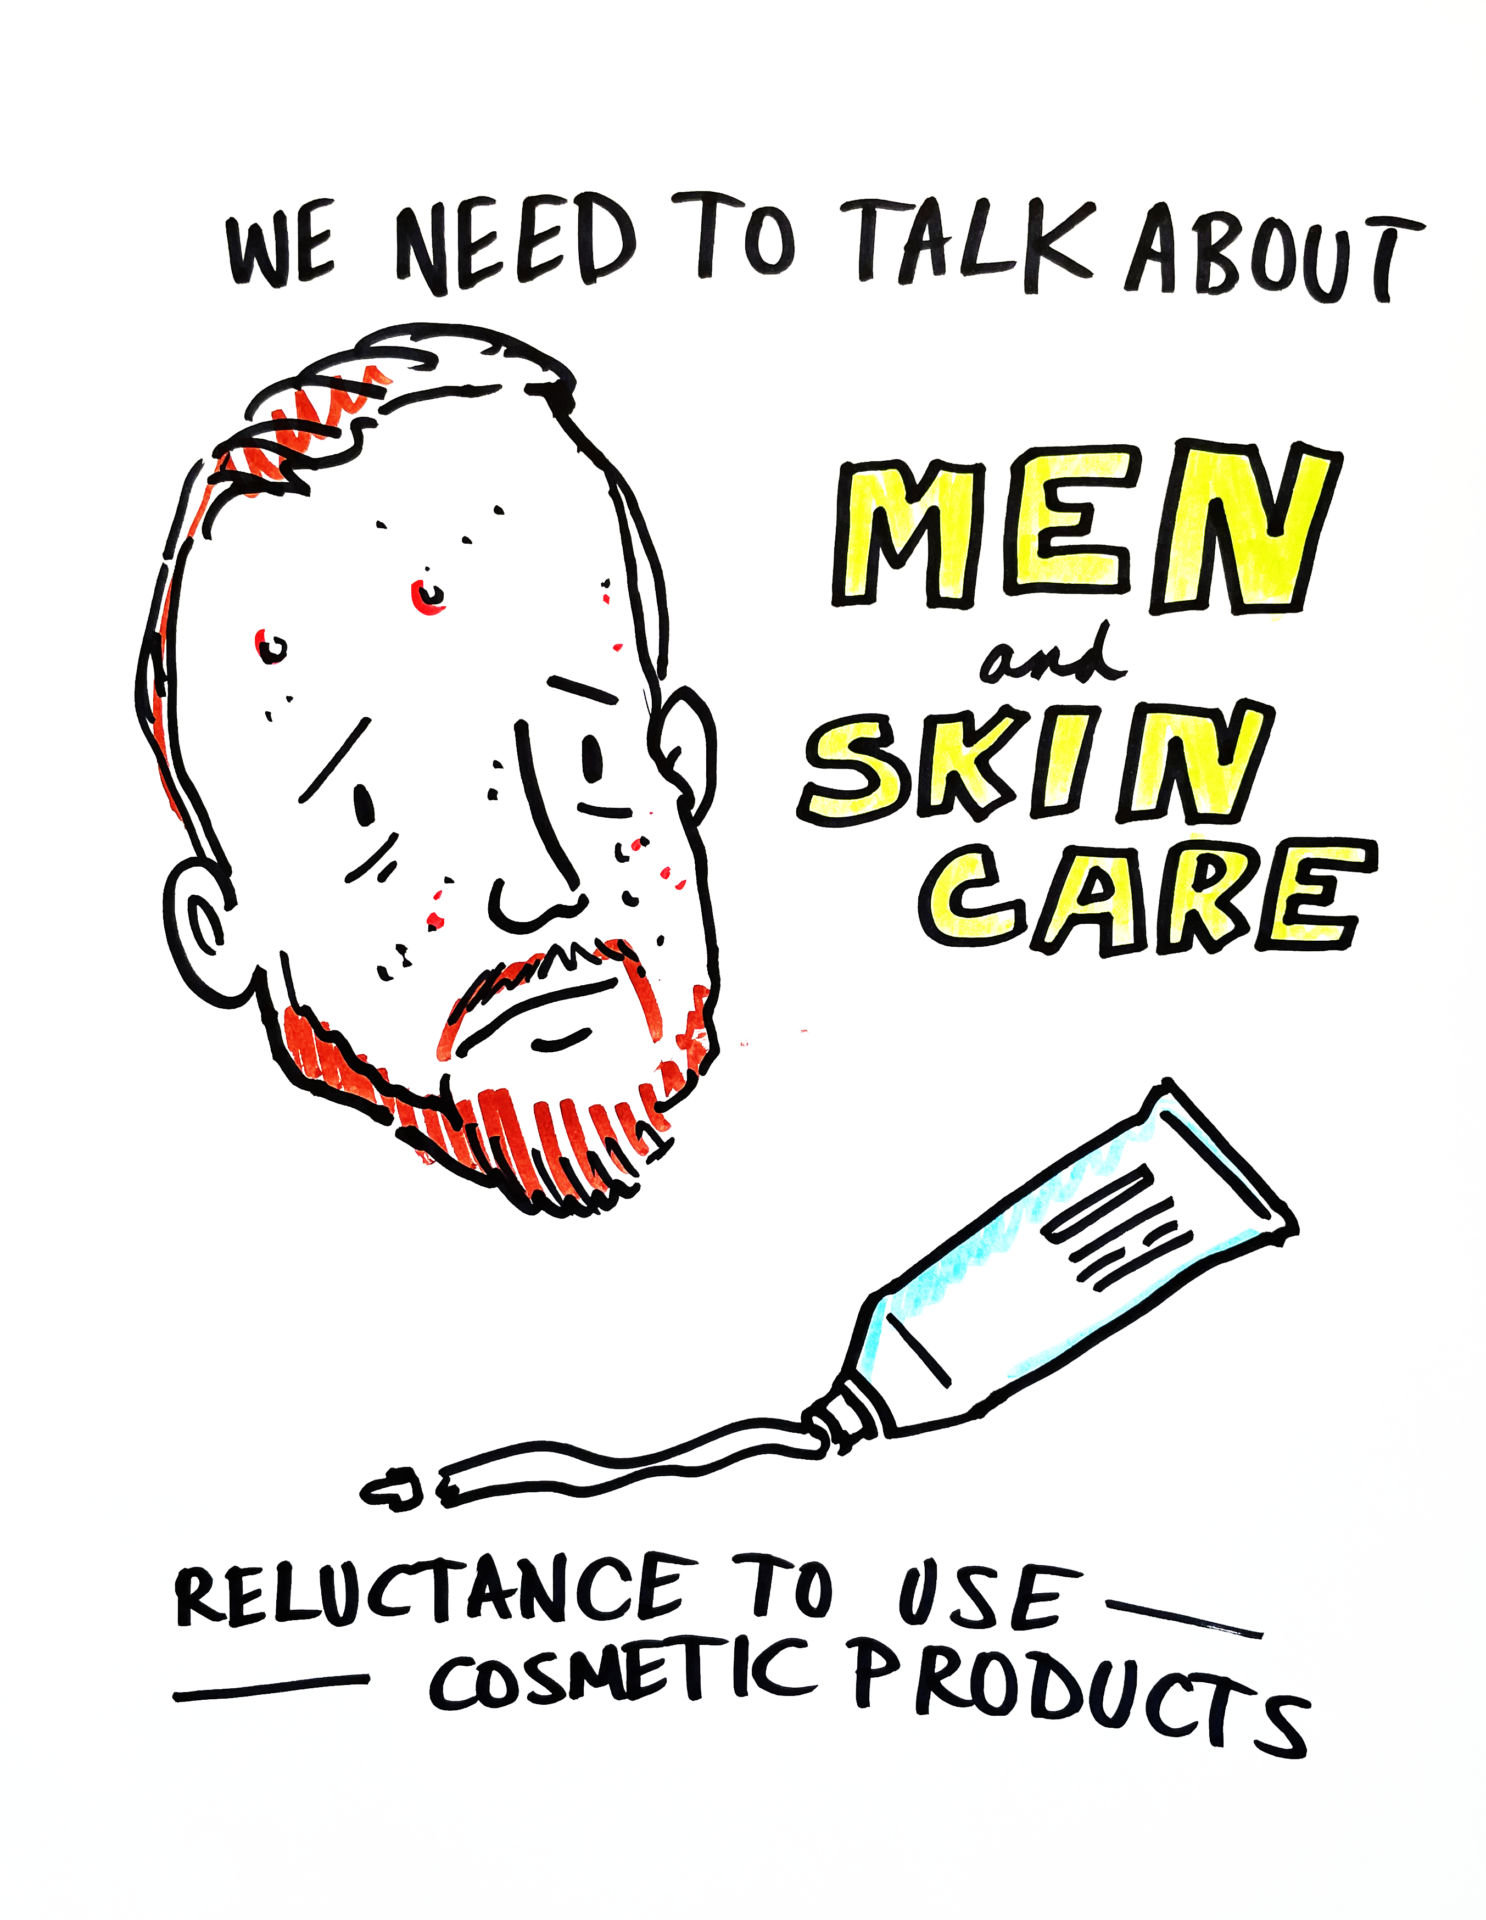 Men and skin care